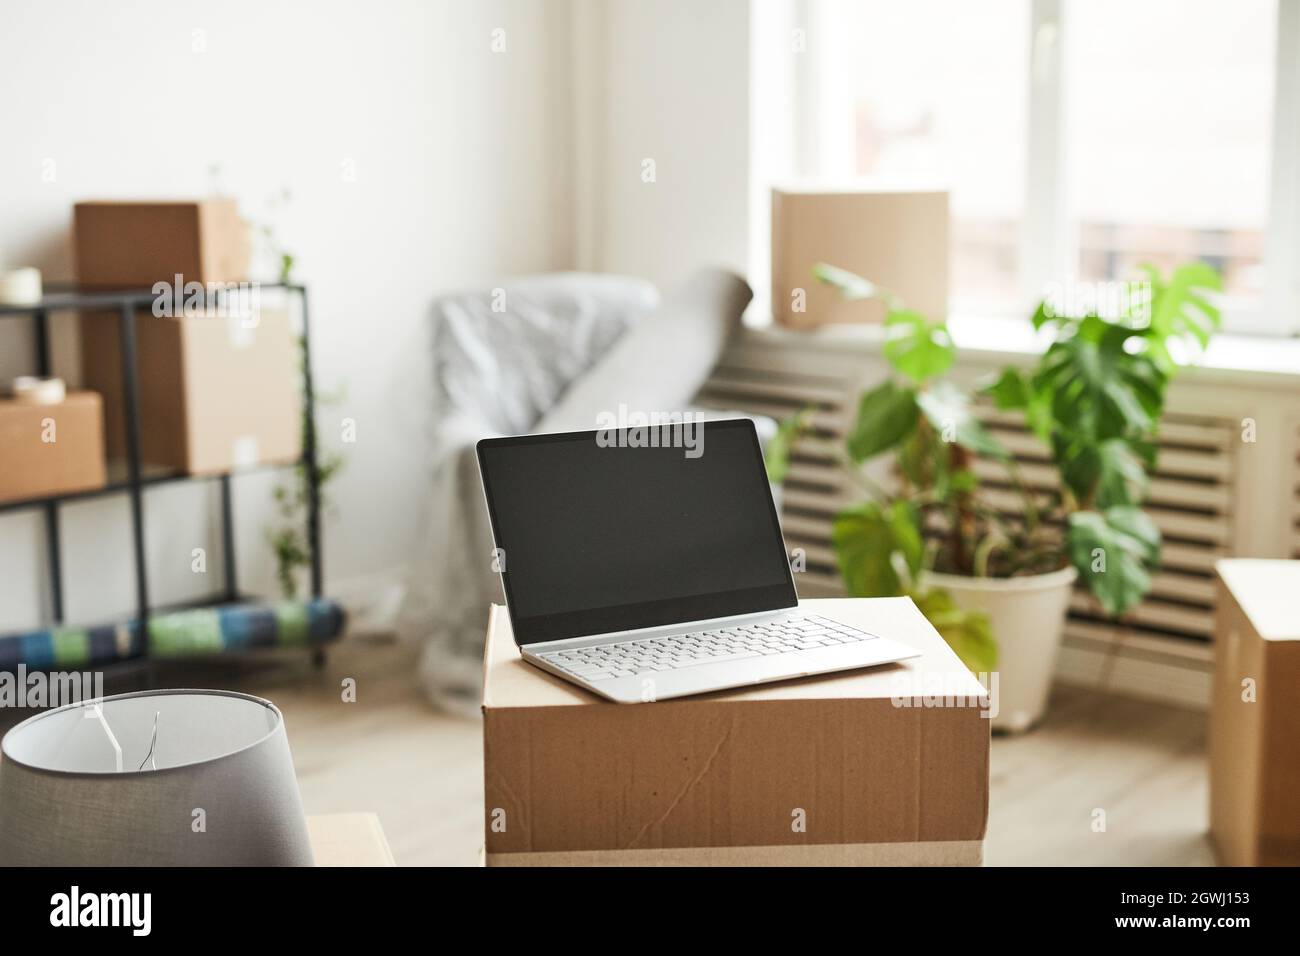 Background image of opened laptop with blank screen on cardboard boxes in new home, moving and relocation concept, copy space Stock Photo